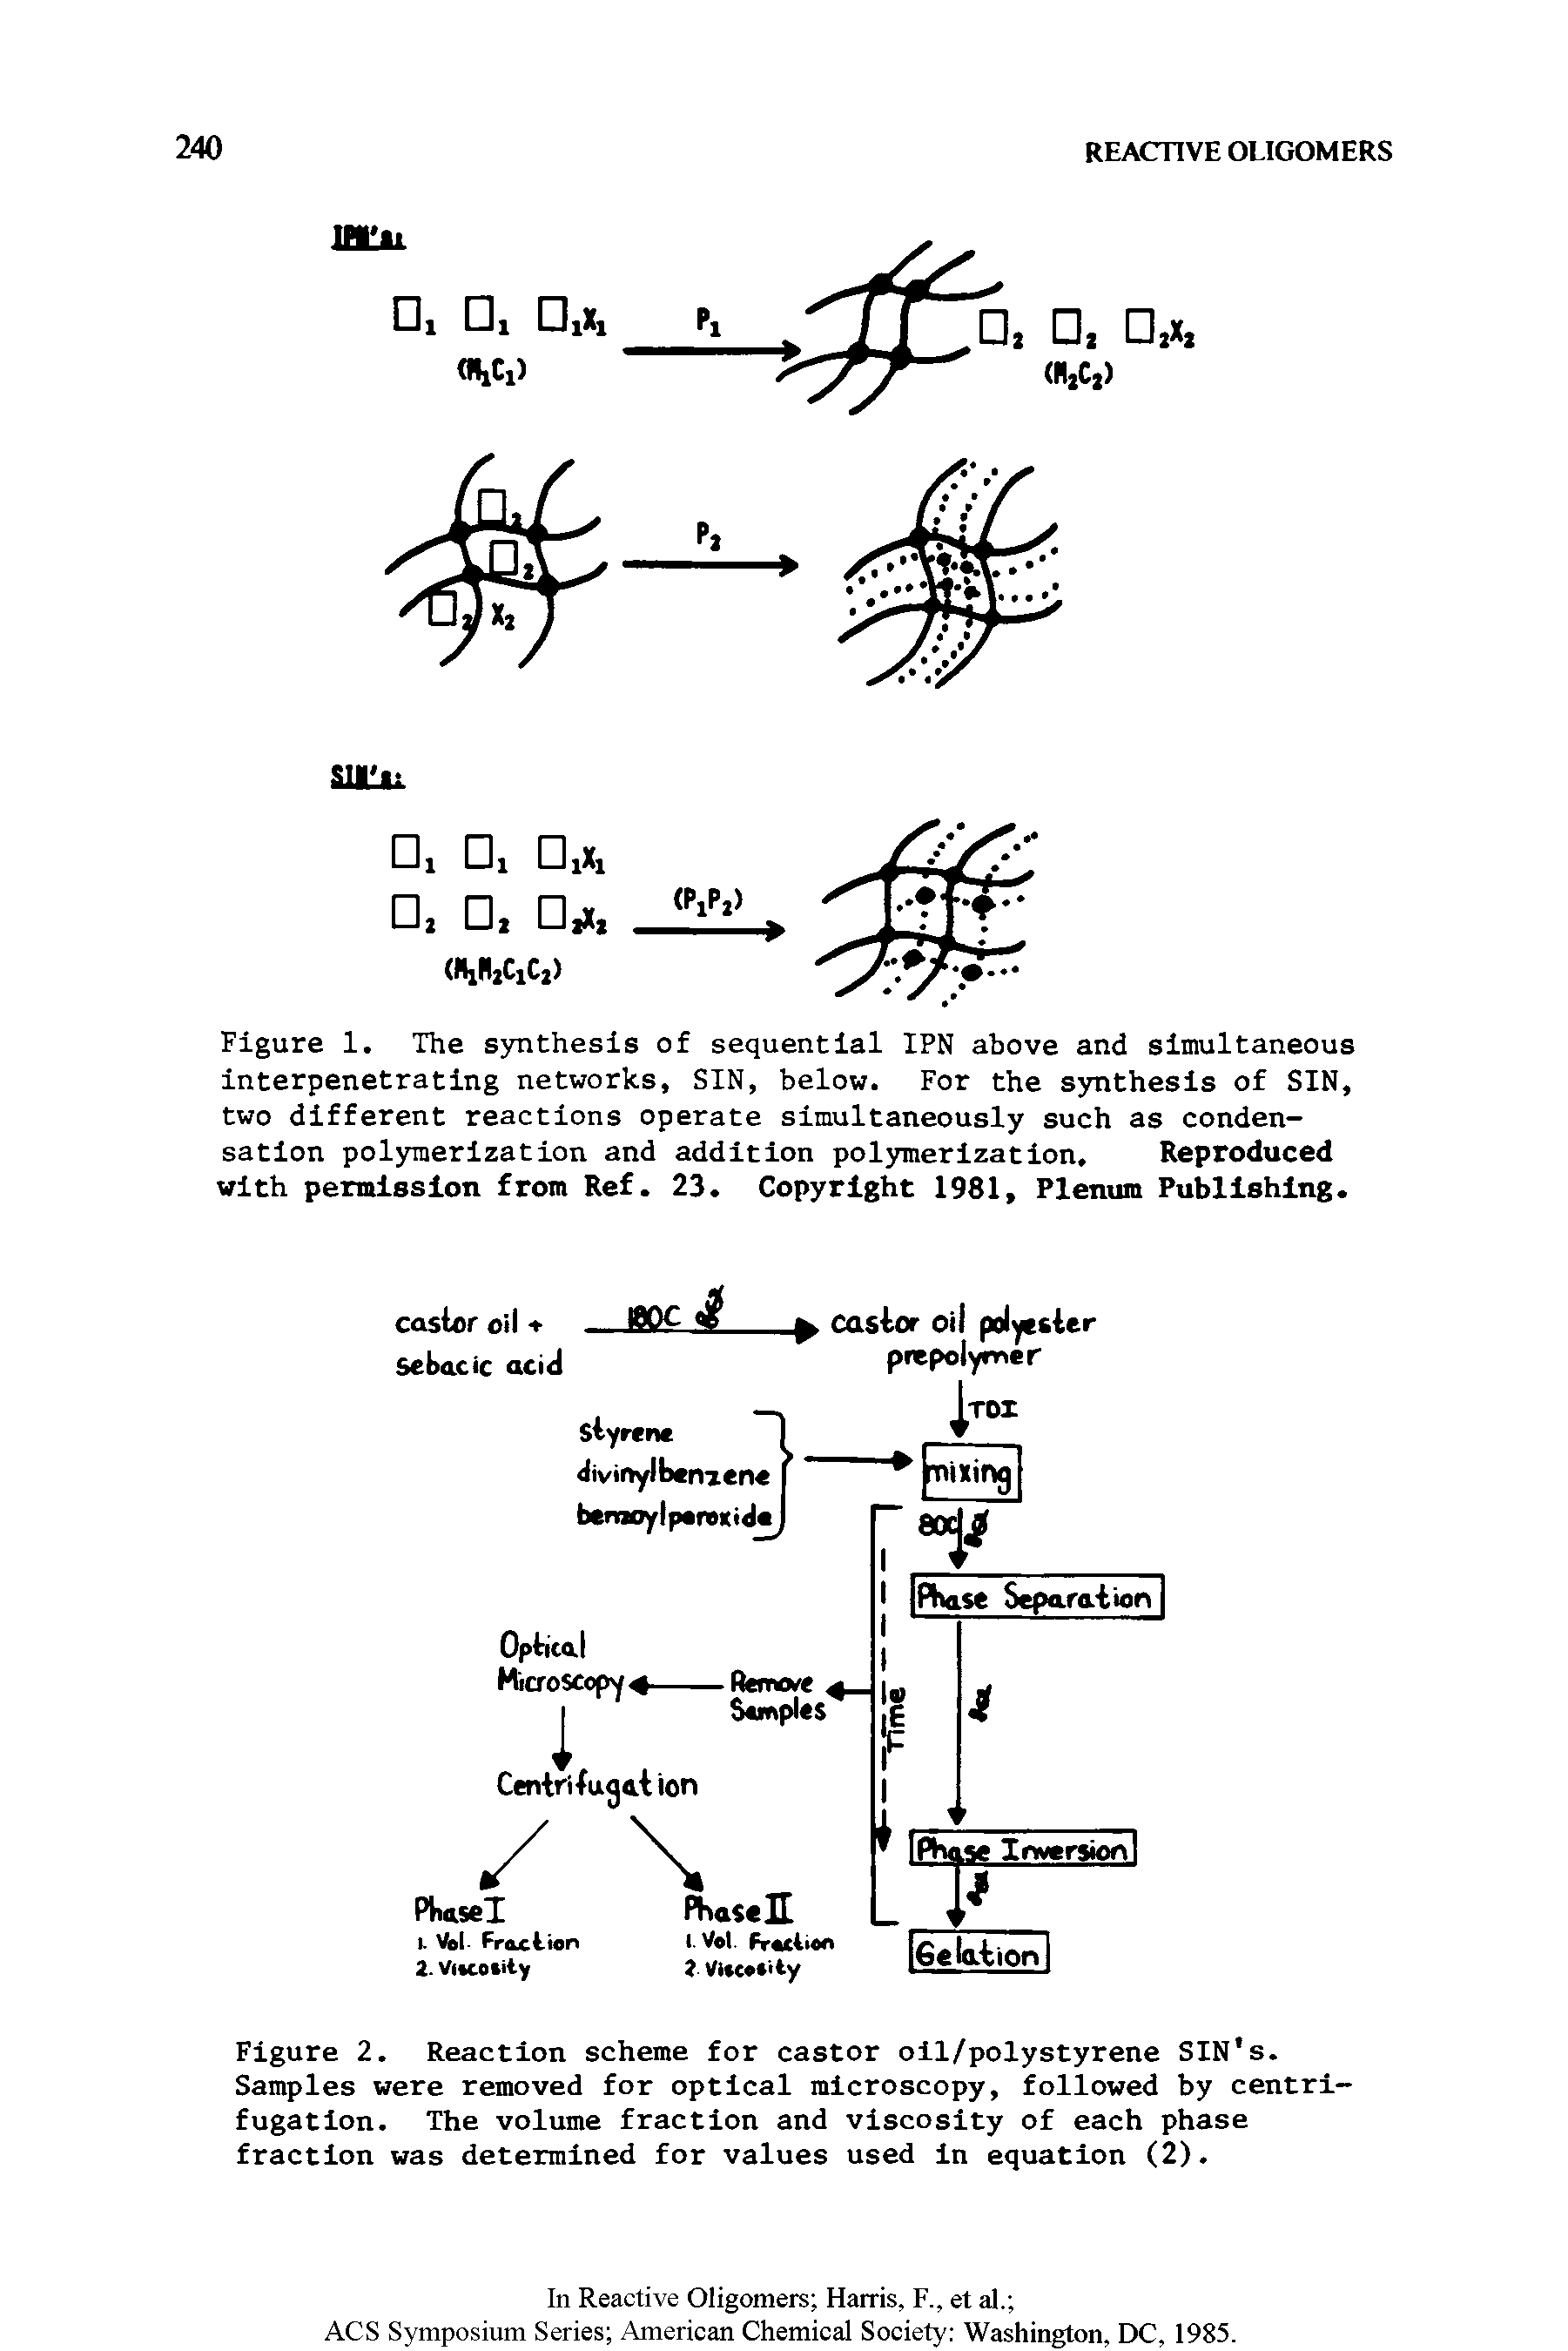 Figure 1. The synthesis of sequential IPN above and simultaneous interpenetrating networks, SIN, below. For the synthesis of SIN, two different reactions operate simultaneously such as condensation polymerization and addition polymerization. Reproduced with permission from Ref. 23. Copyright 1981, Plenum Publishing.